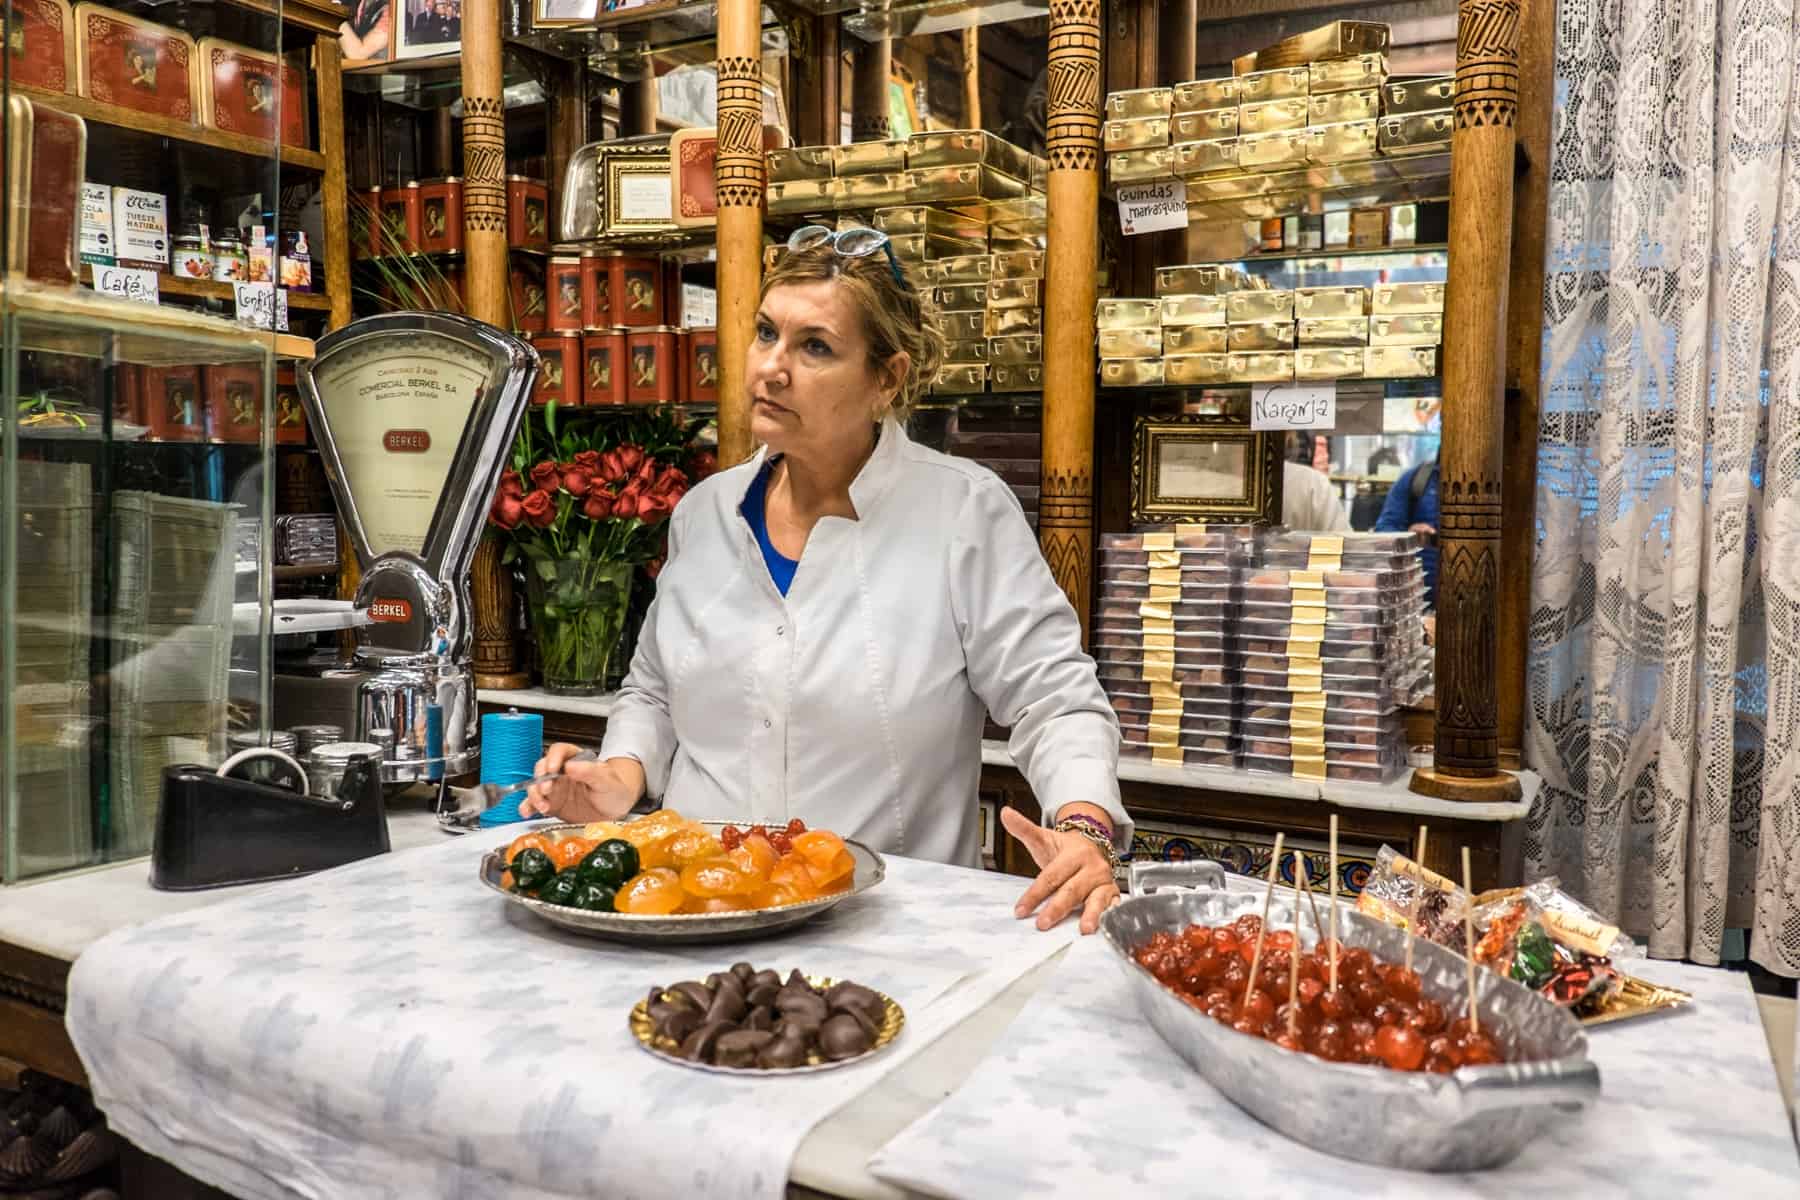 A woman in a white shirt stands shows off green, yellow and red candied sweets in a traditional confectionary store in Zaragoza. Behind her are carved wooden shelves full of boxes. 